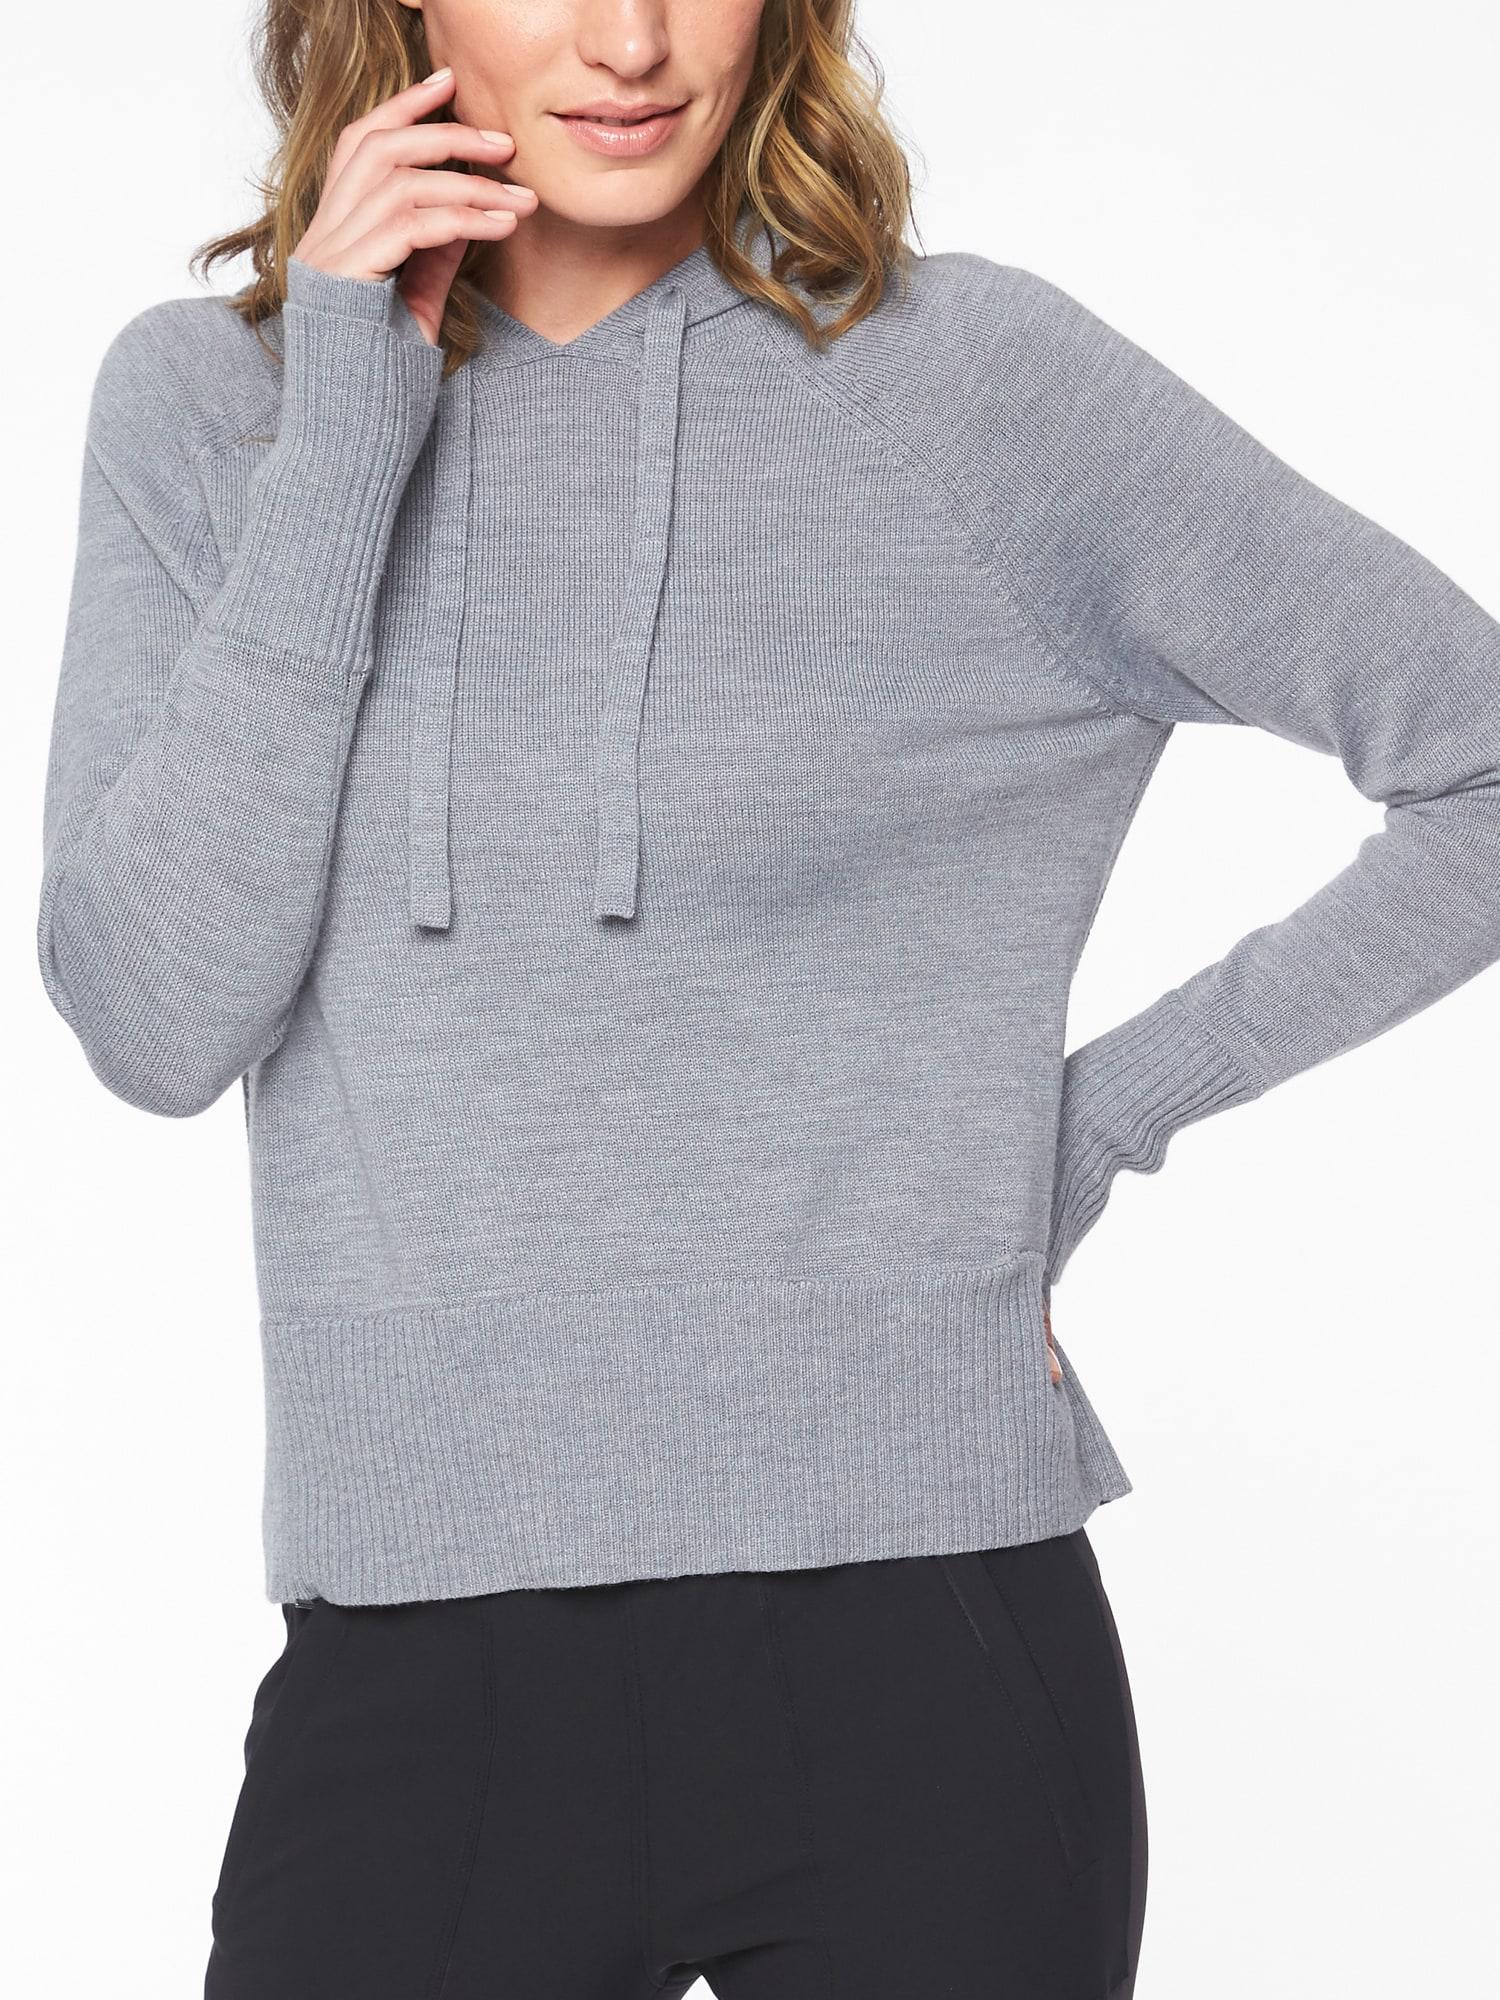 athletica sweaters